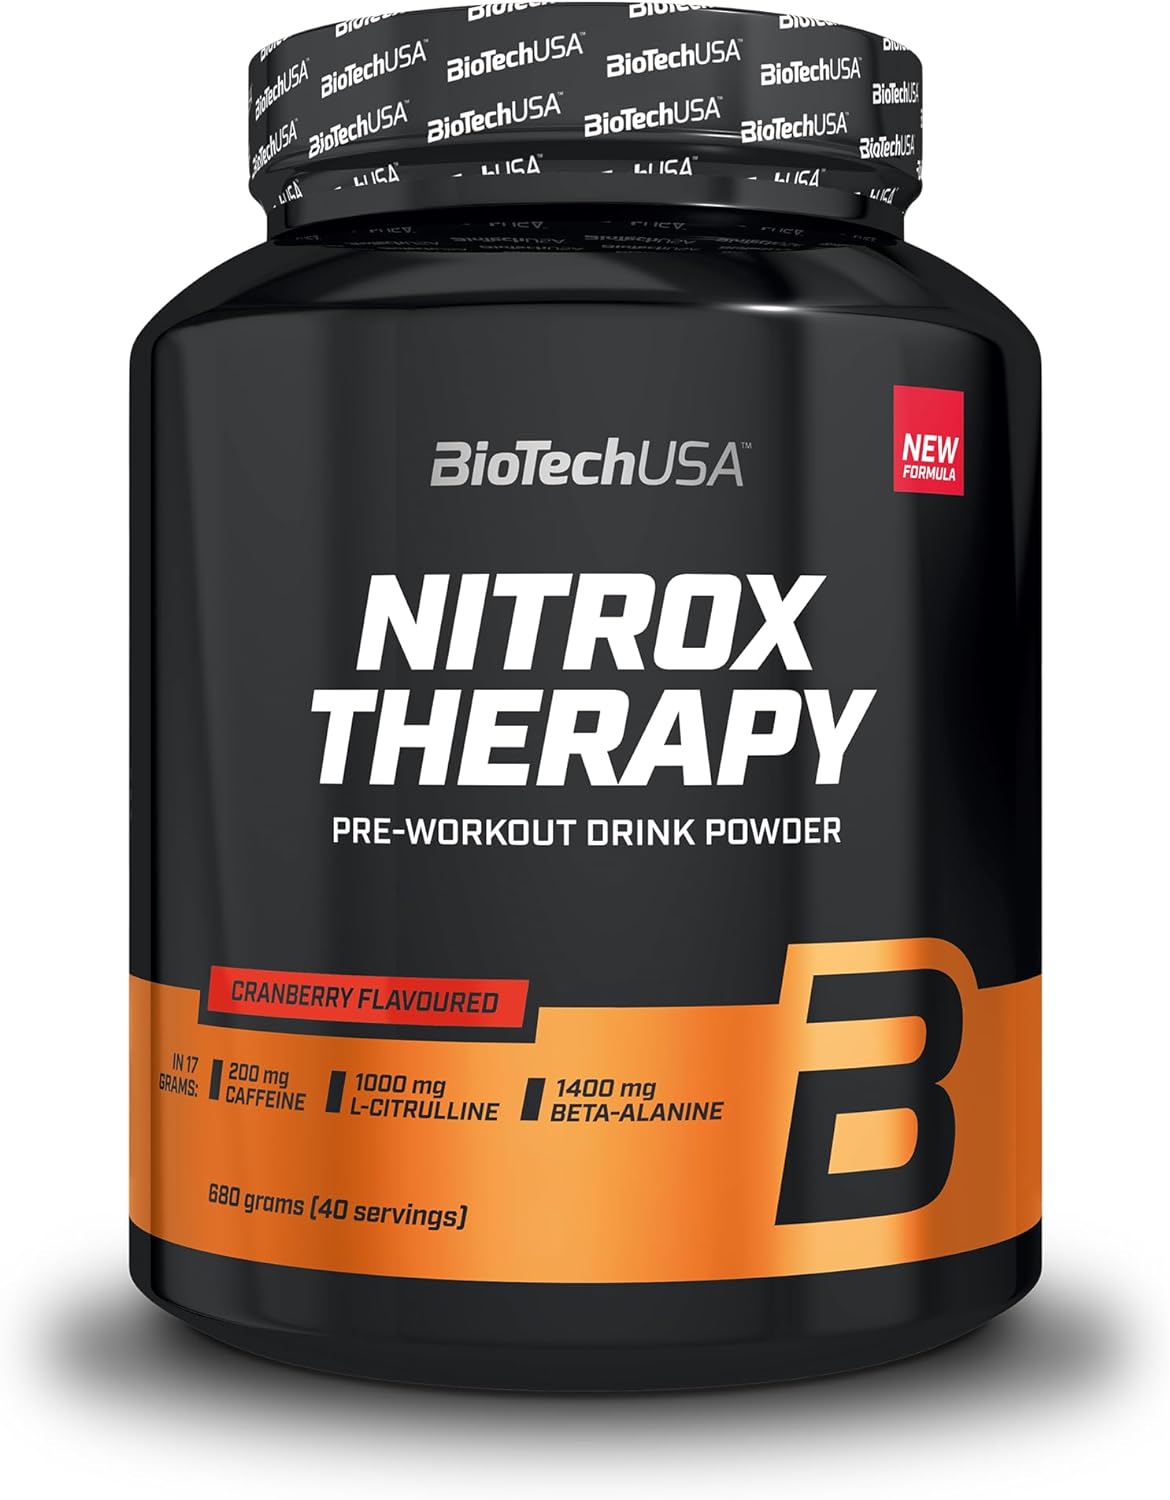 BioTechUSA Nitrox Therapy, Flavoured Pre-Workout Food Supplement Drink300 Grams